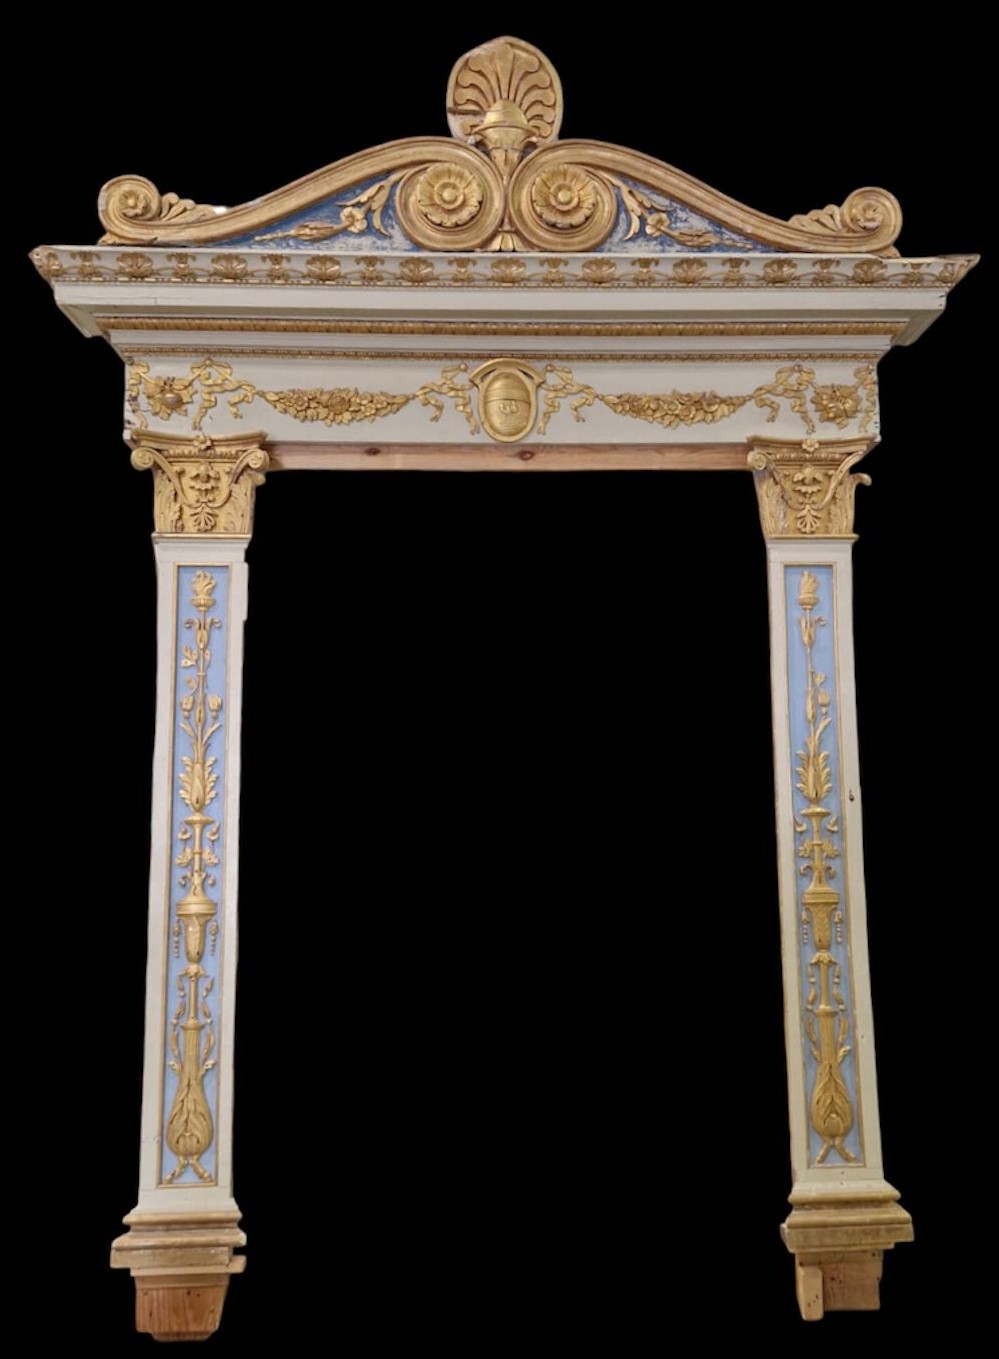 DARS589 - Portal in lacquered and carved wood, 18th century, cm W 310 x H 395